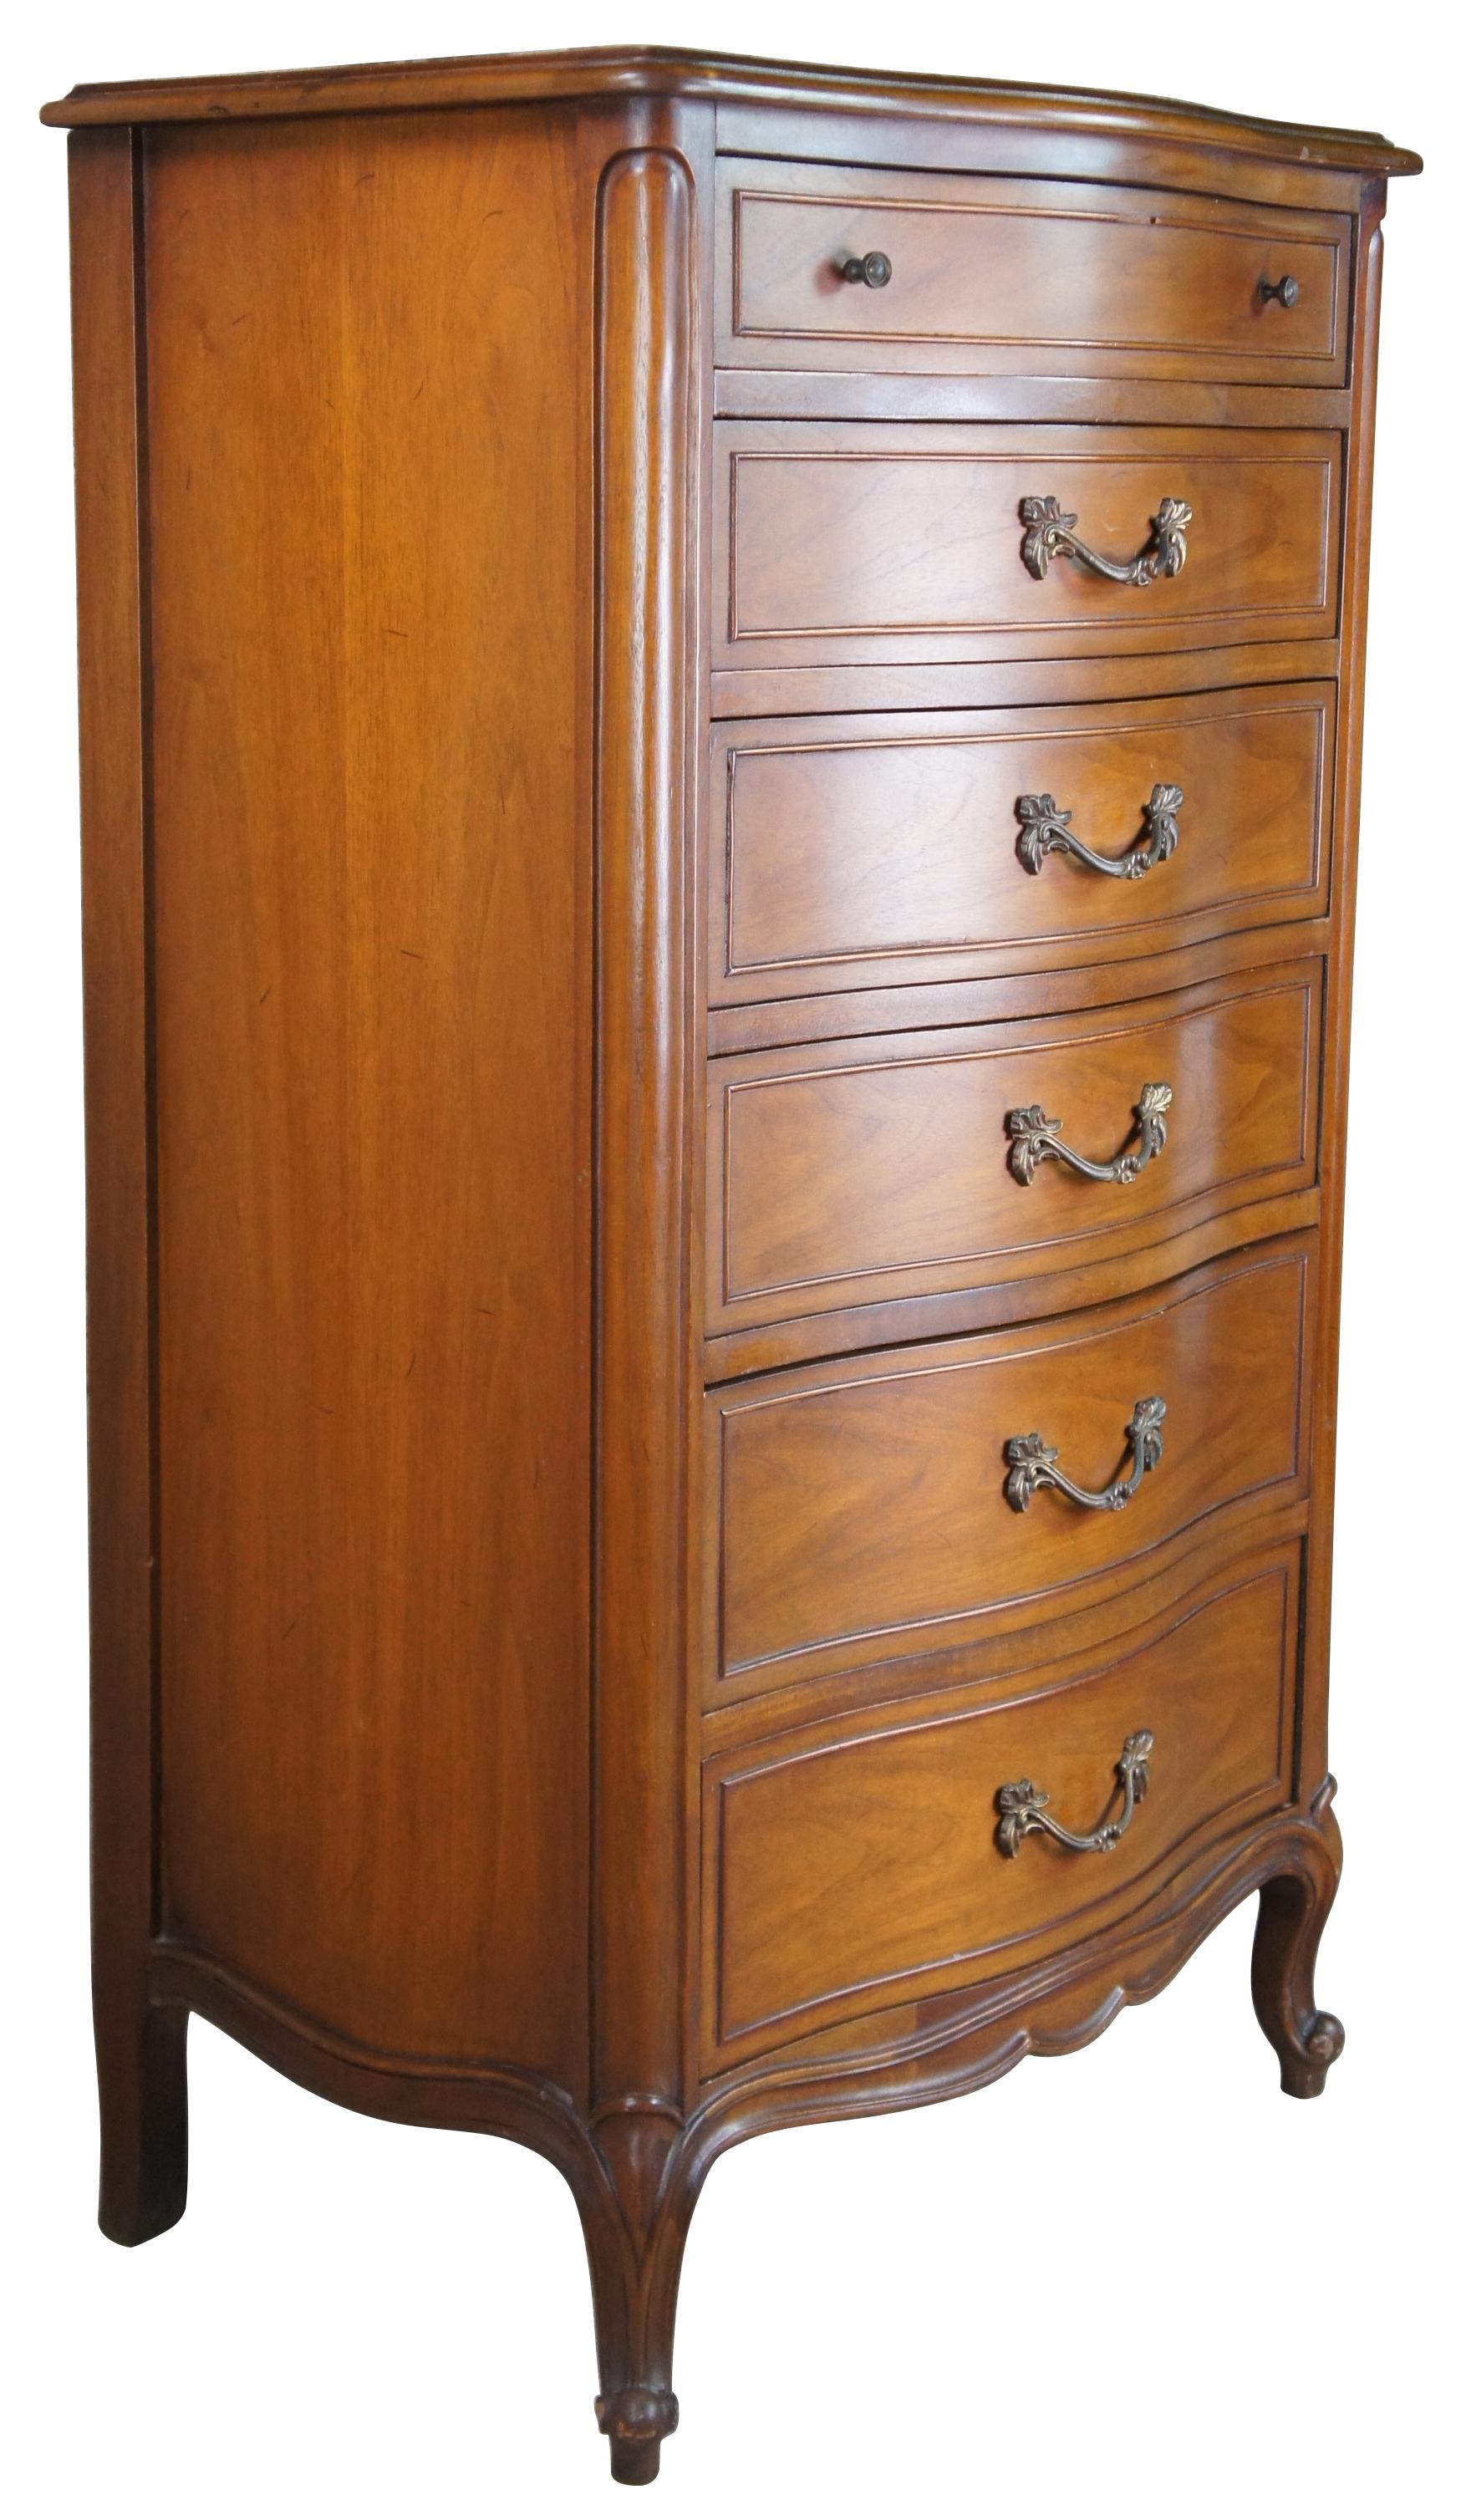 1966 mid century Drexel Bordeaux French Provincial semanier chest or dresser. Made from walnut with a serpentine form, six drawers and cabriole legs with scrolled feet. 206-491.
   